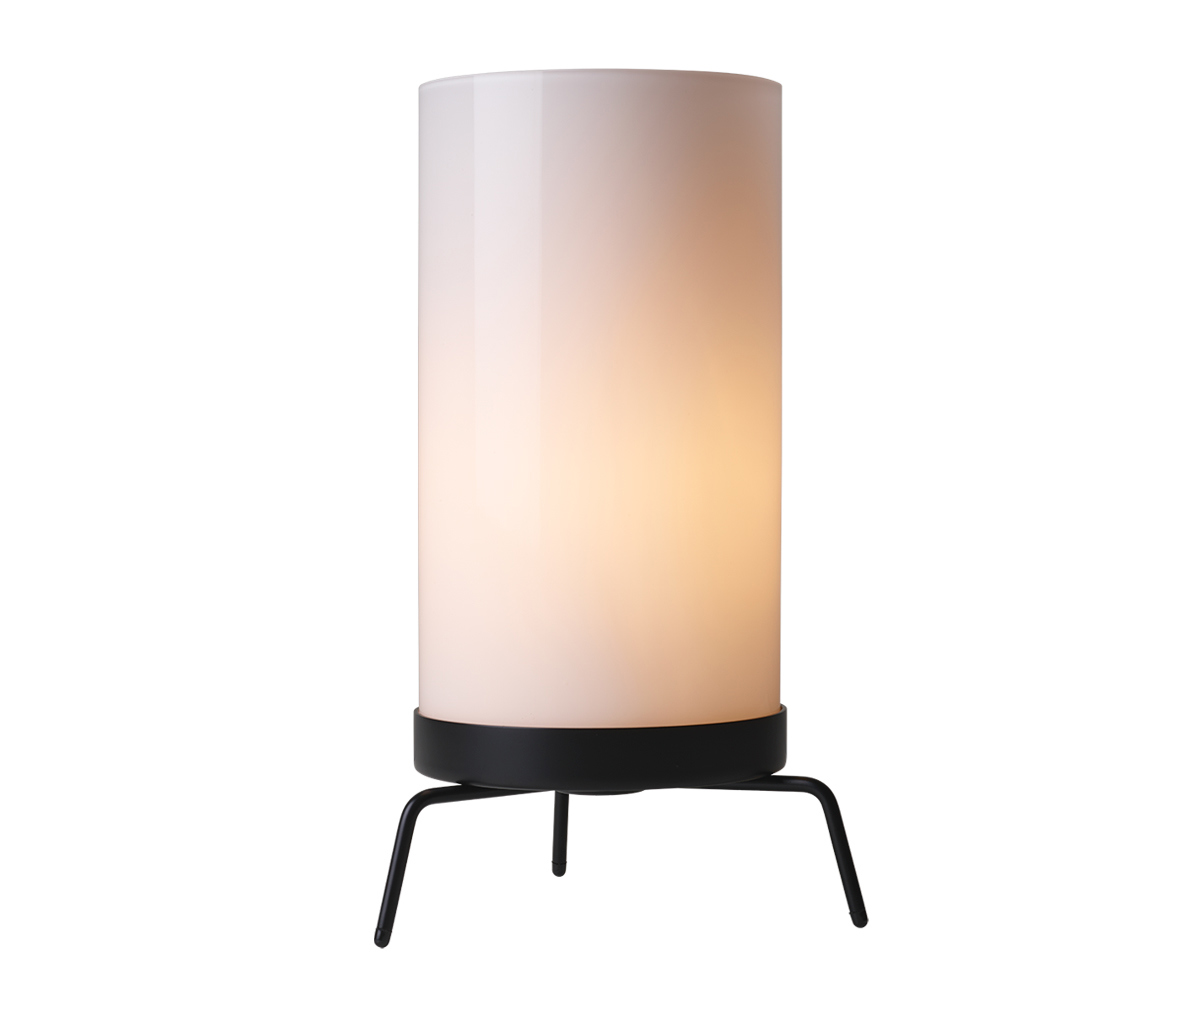 PM-02 Table Lamp